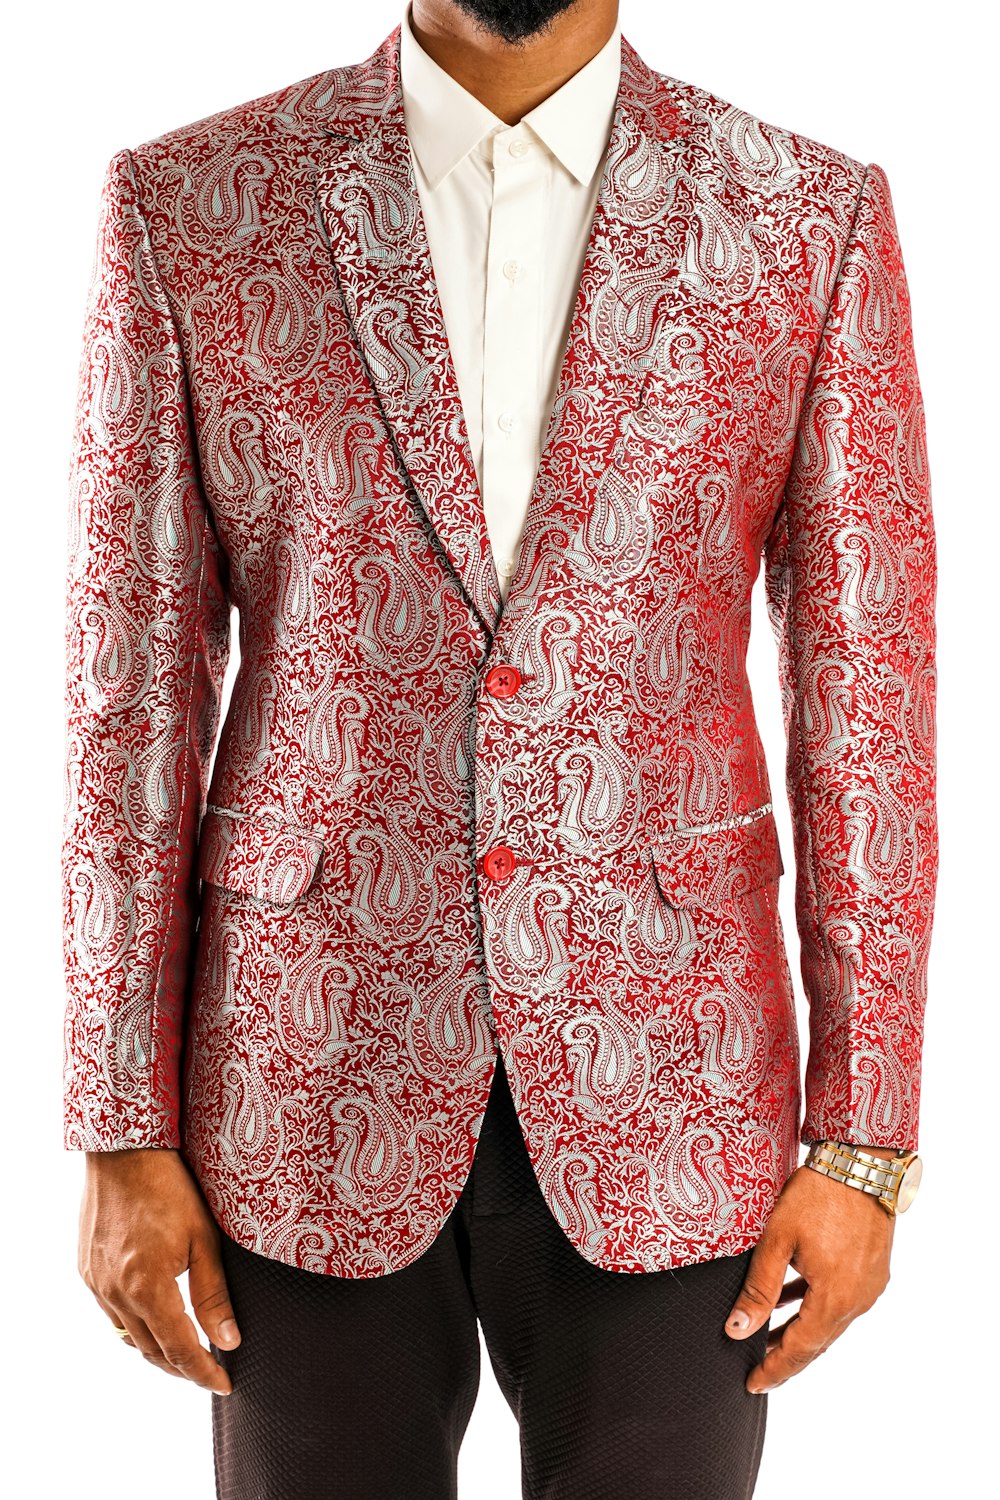 a man wearing a red and white paisley blazer